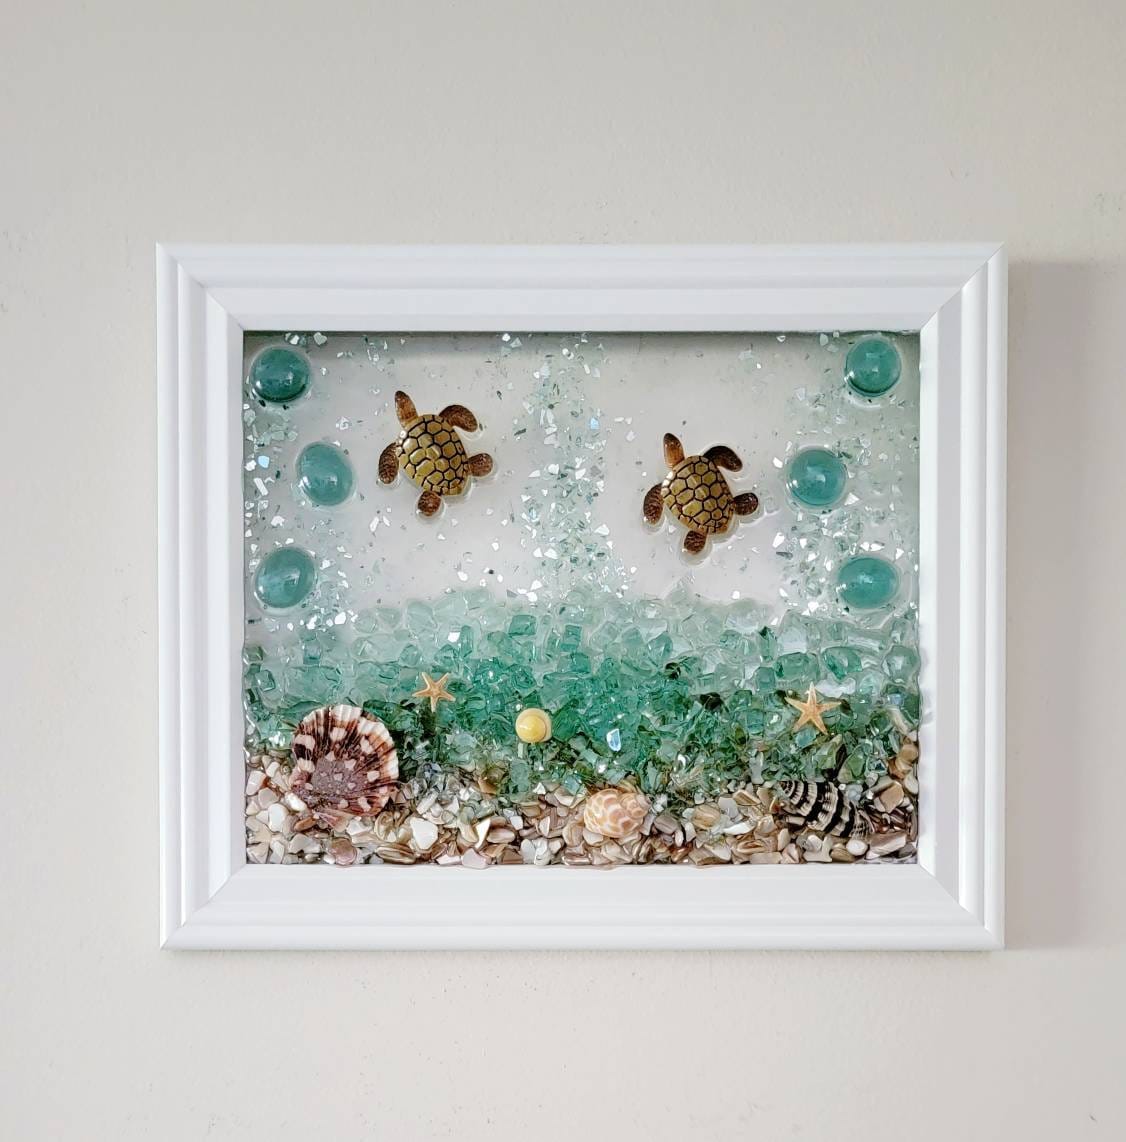 Kit, Do It Yourself DIY Resin Art Kit, Sea Glass Picture, Shell Art,  Crafting Gift, Home Crafting. Craft Kits. Turtle. 